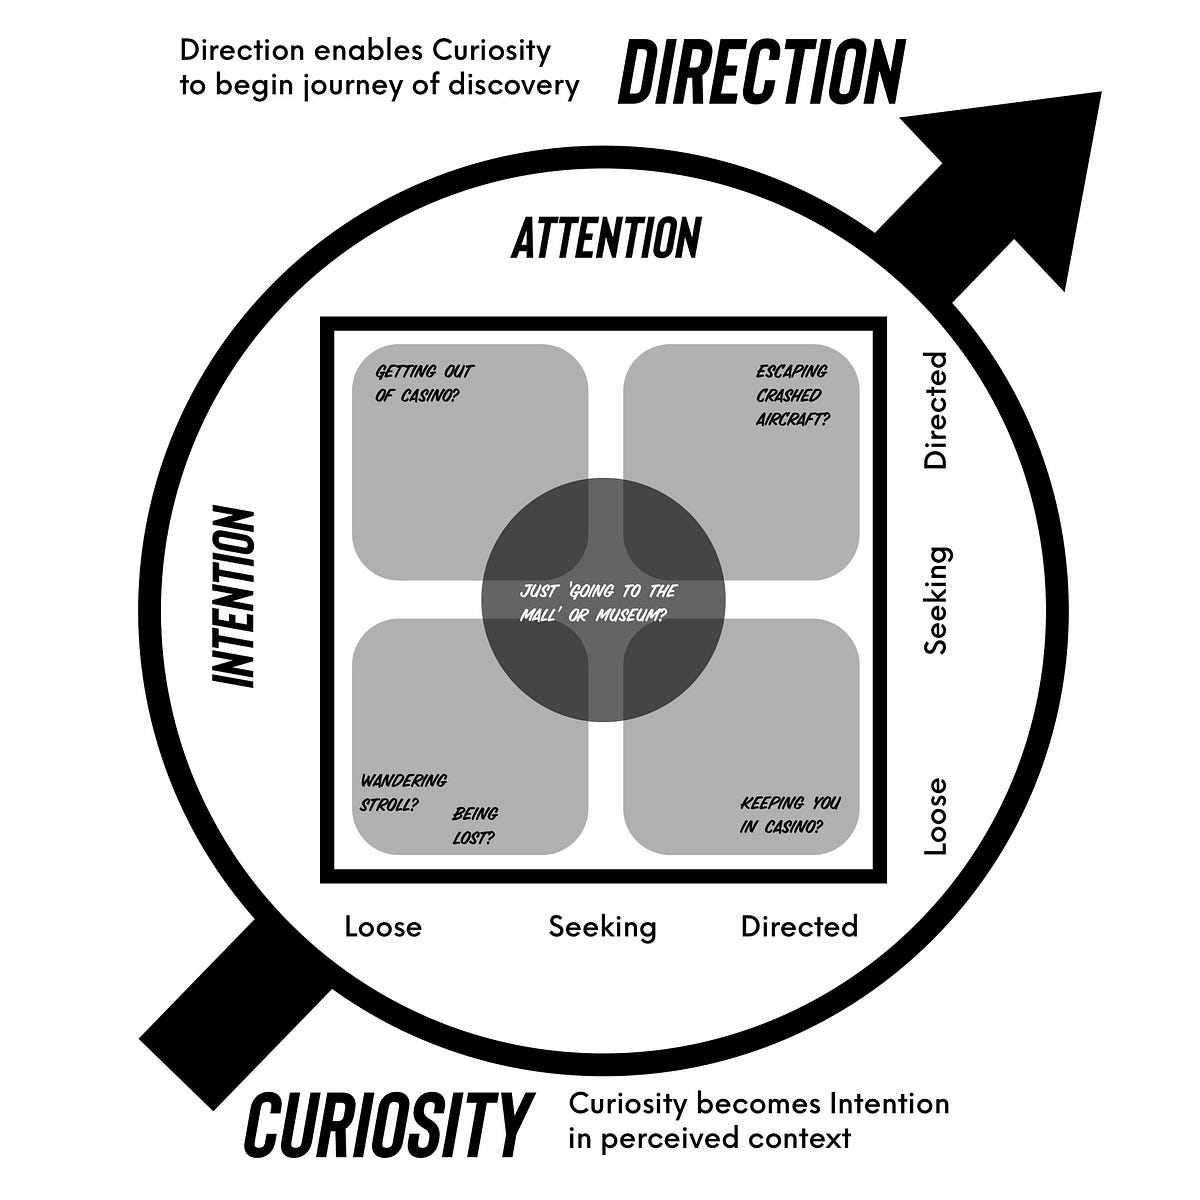 The Intention/Attention model surrounded by a circle of Curiosity and Direction. The seeking of more, and the invitation of direction